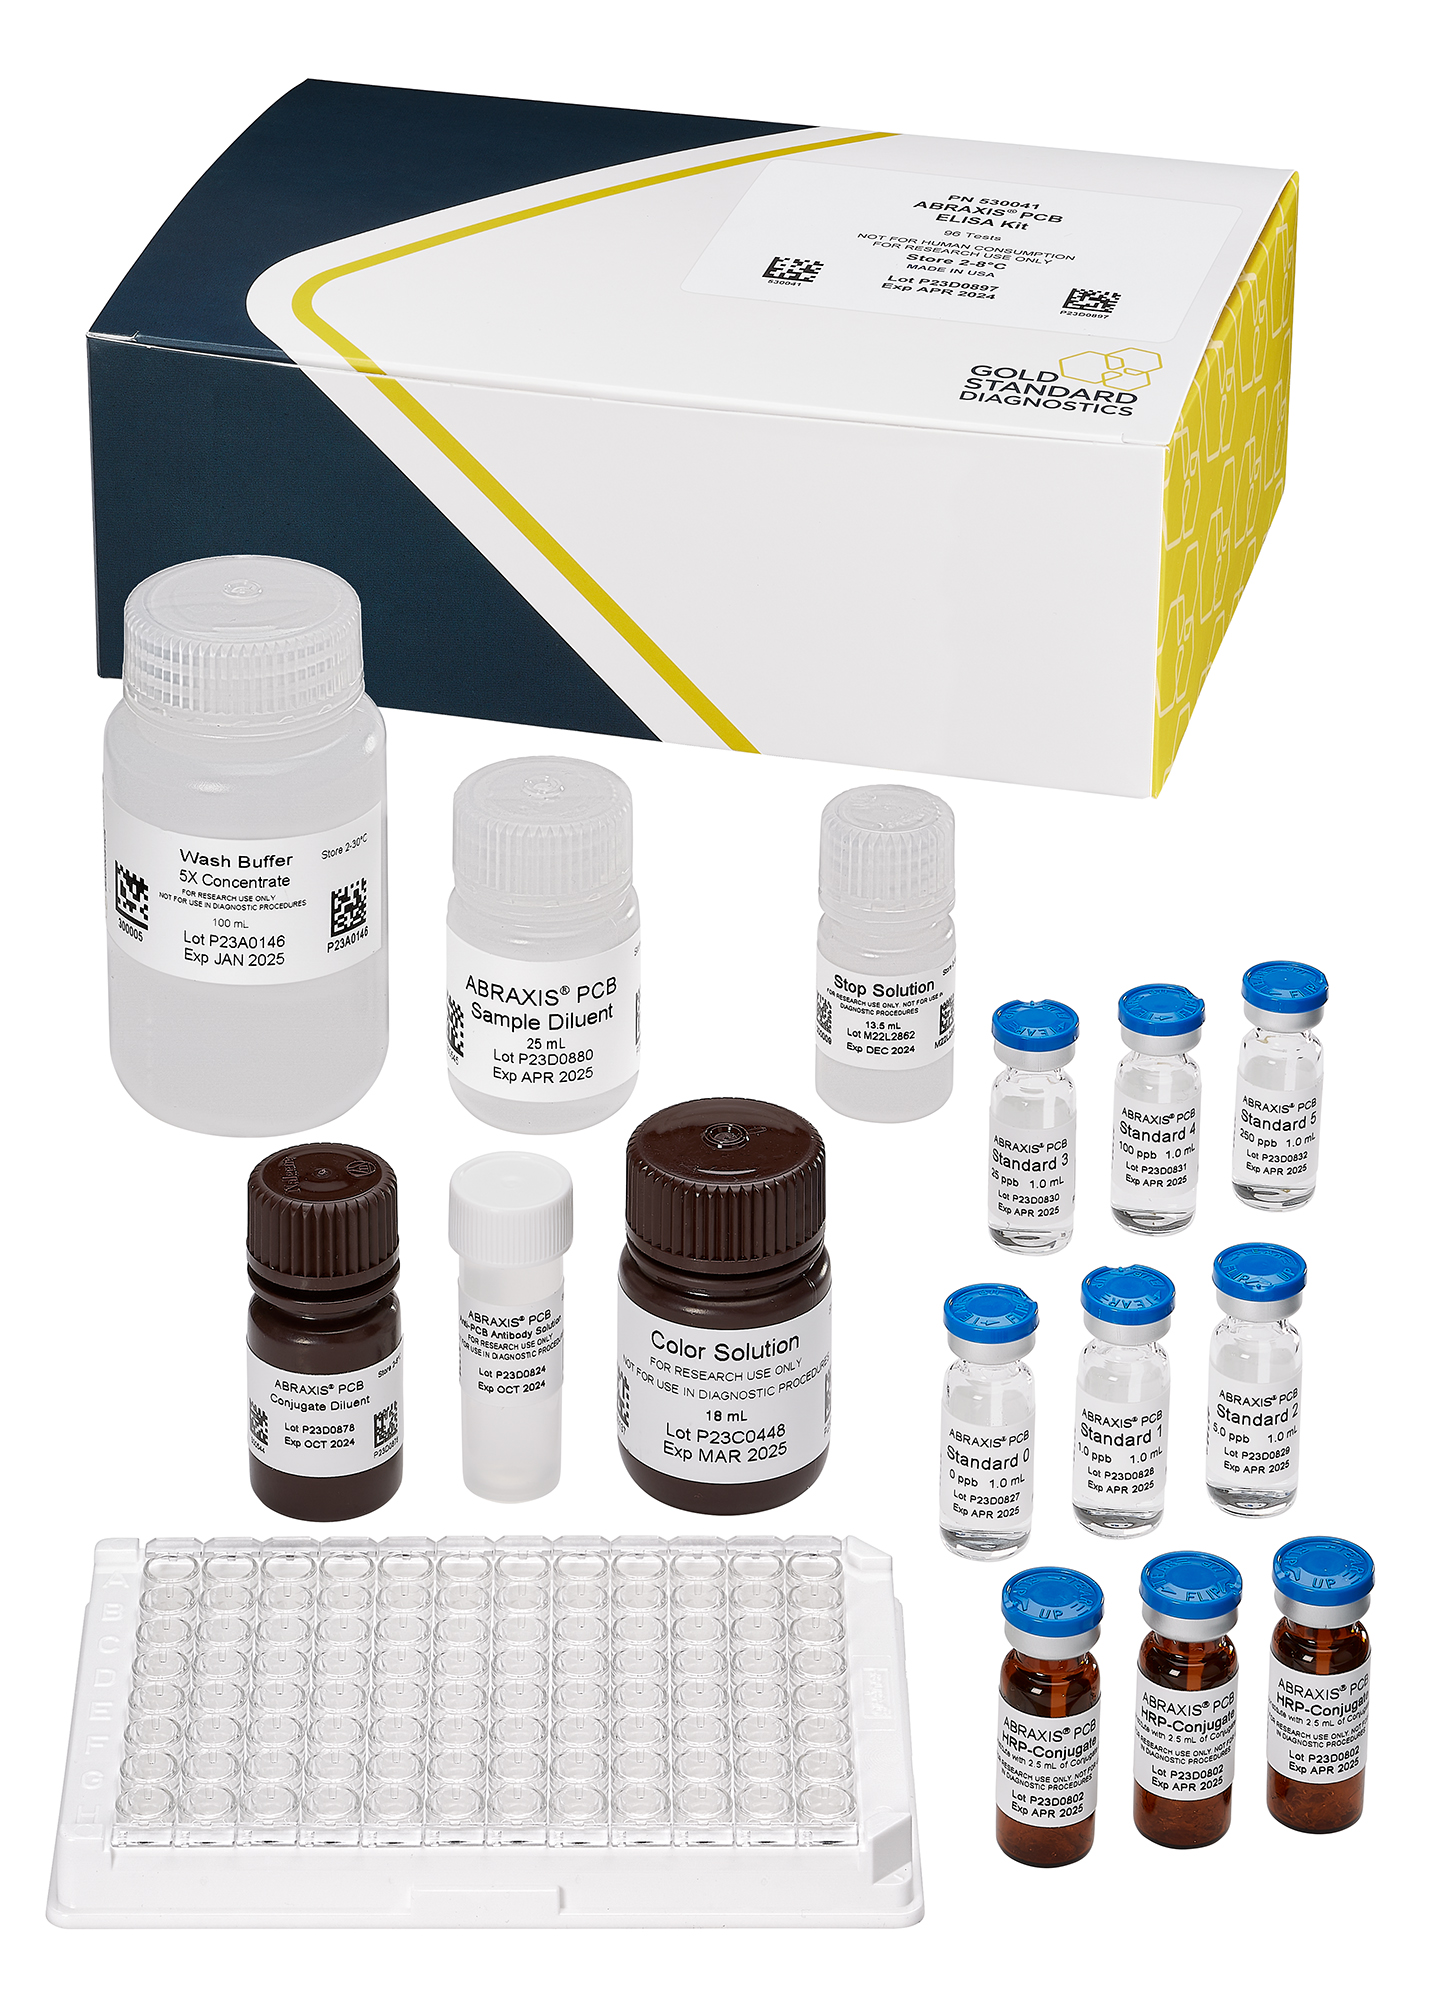 ABRAXIS® PCBs Higher Chlorinated, ELISA, 96-test